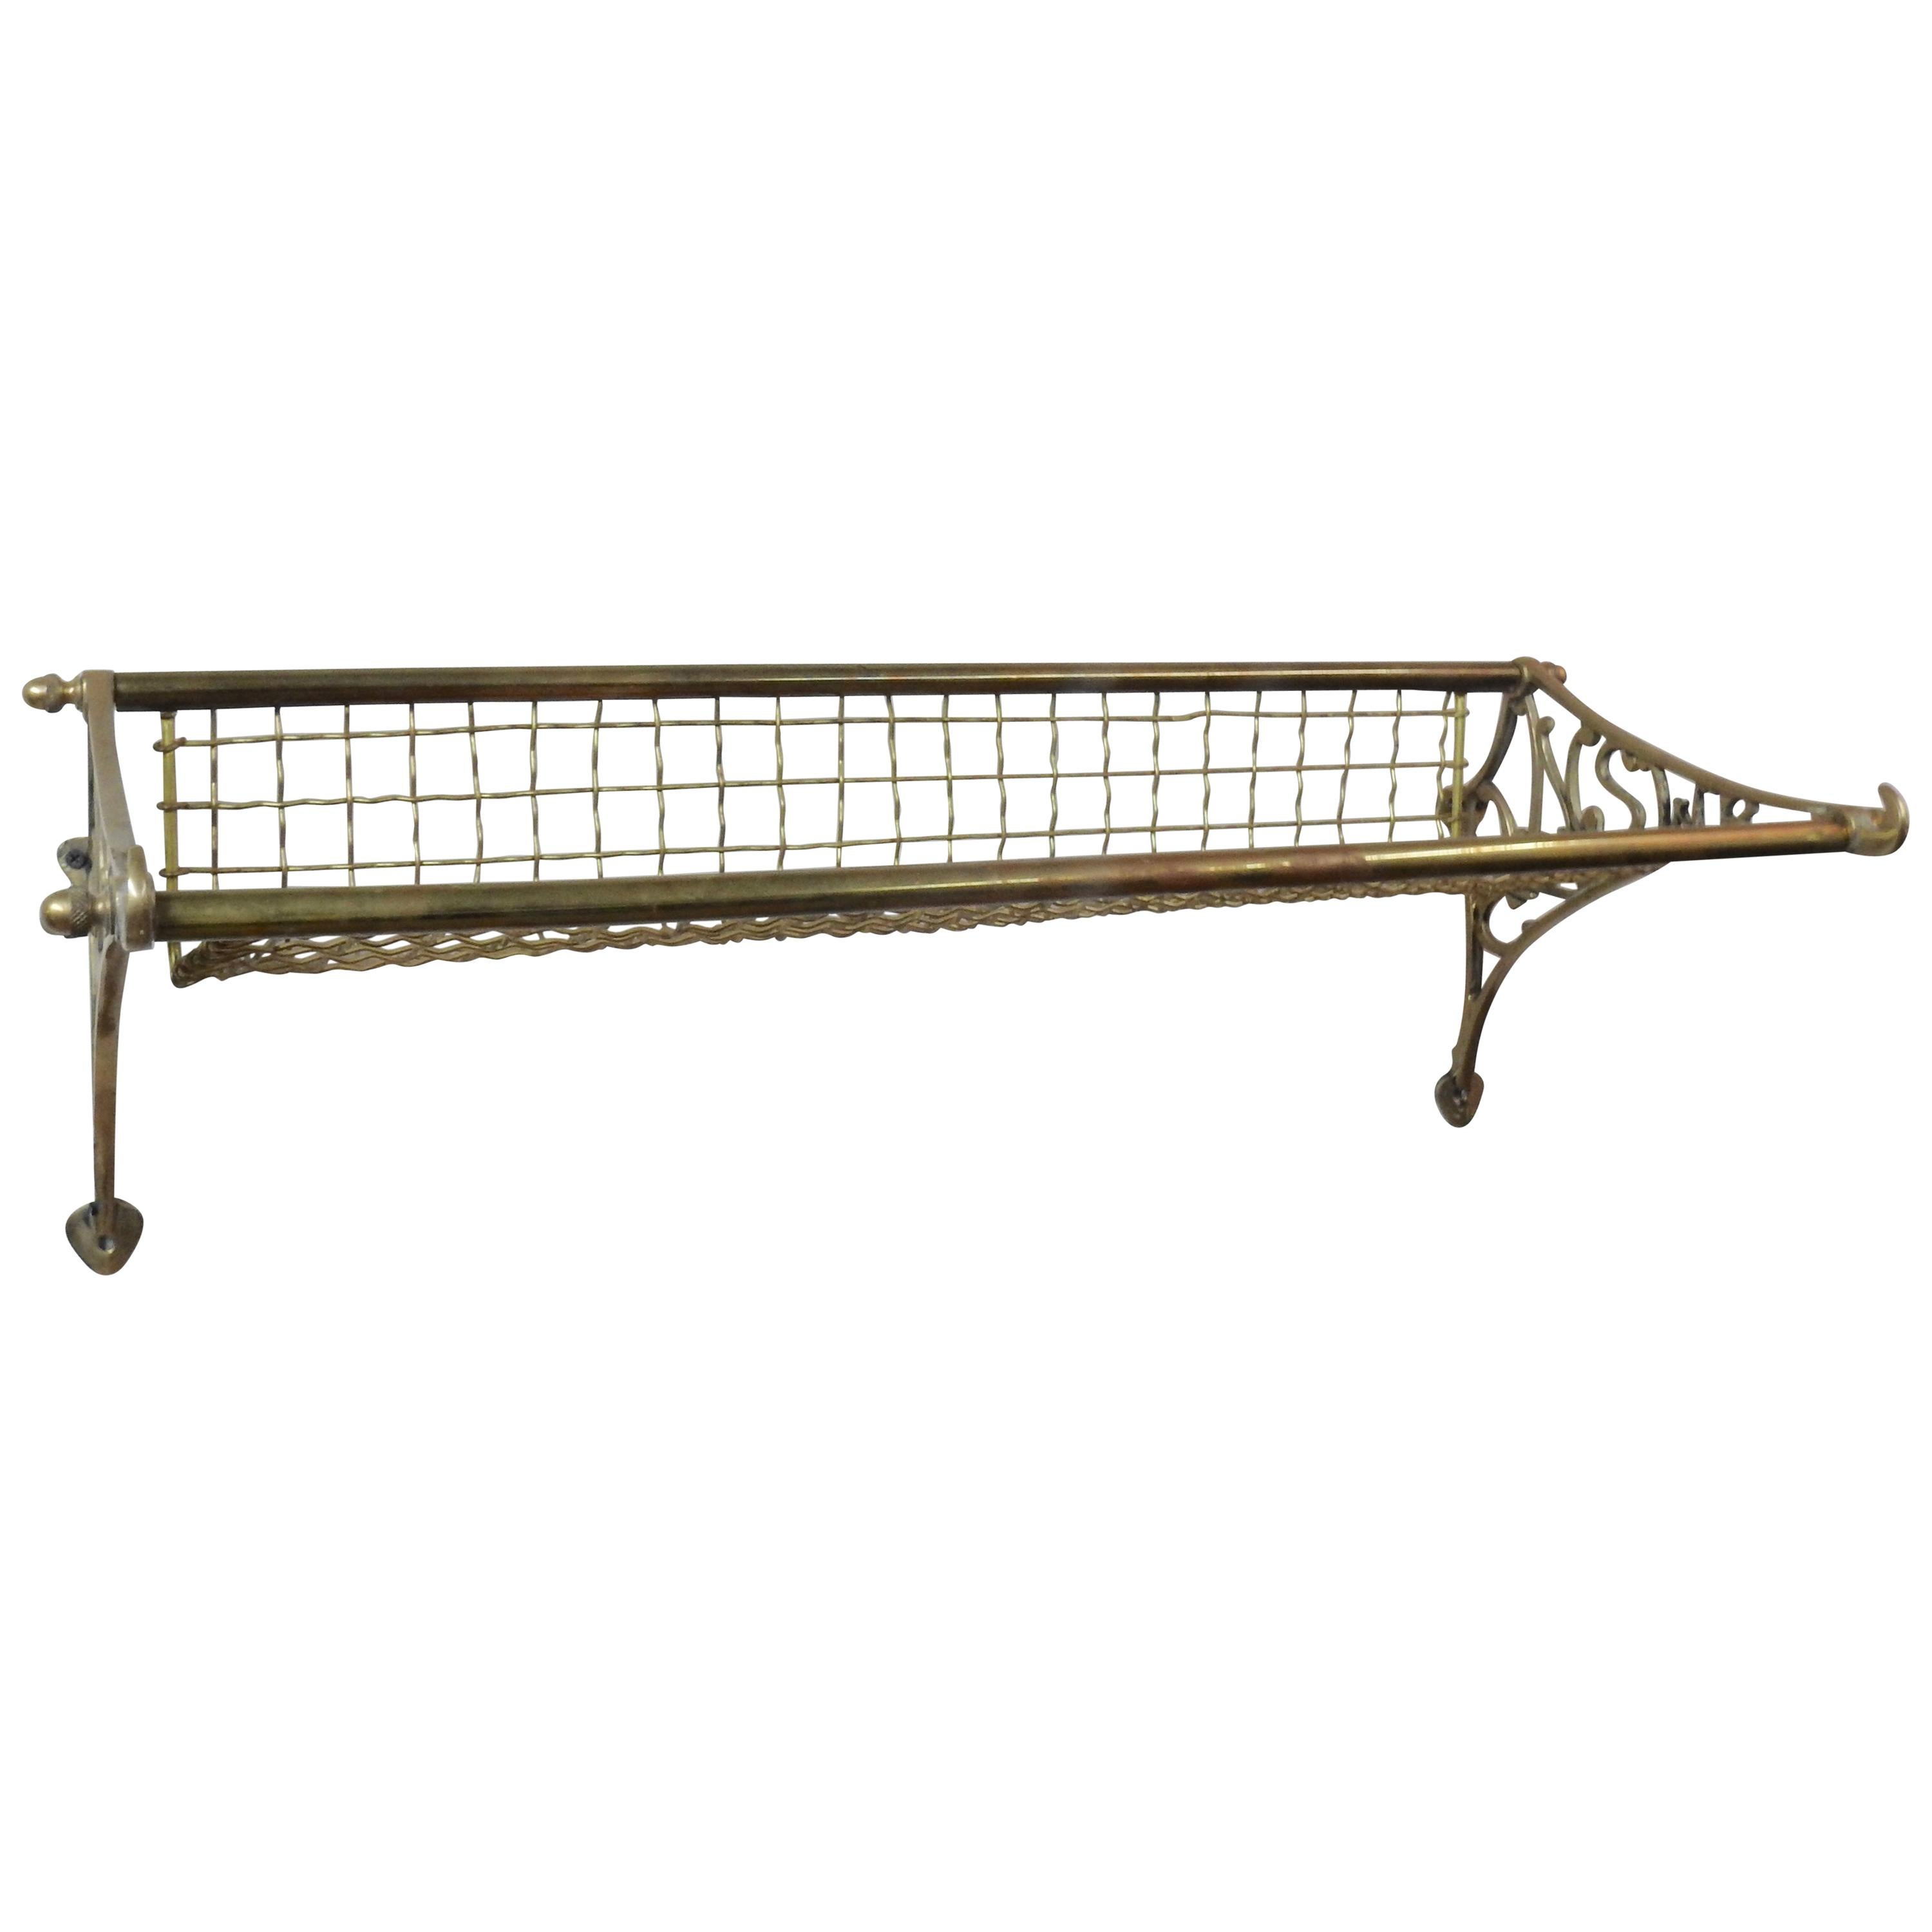 Antique New South Wales Railroad Train Luggage Rack